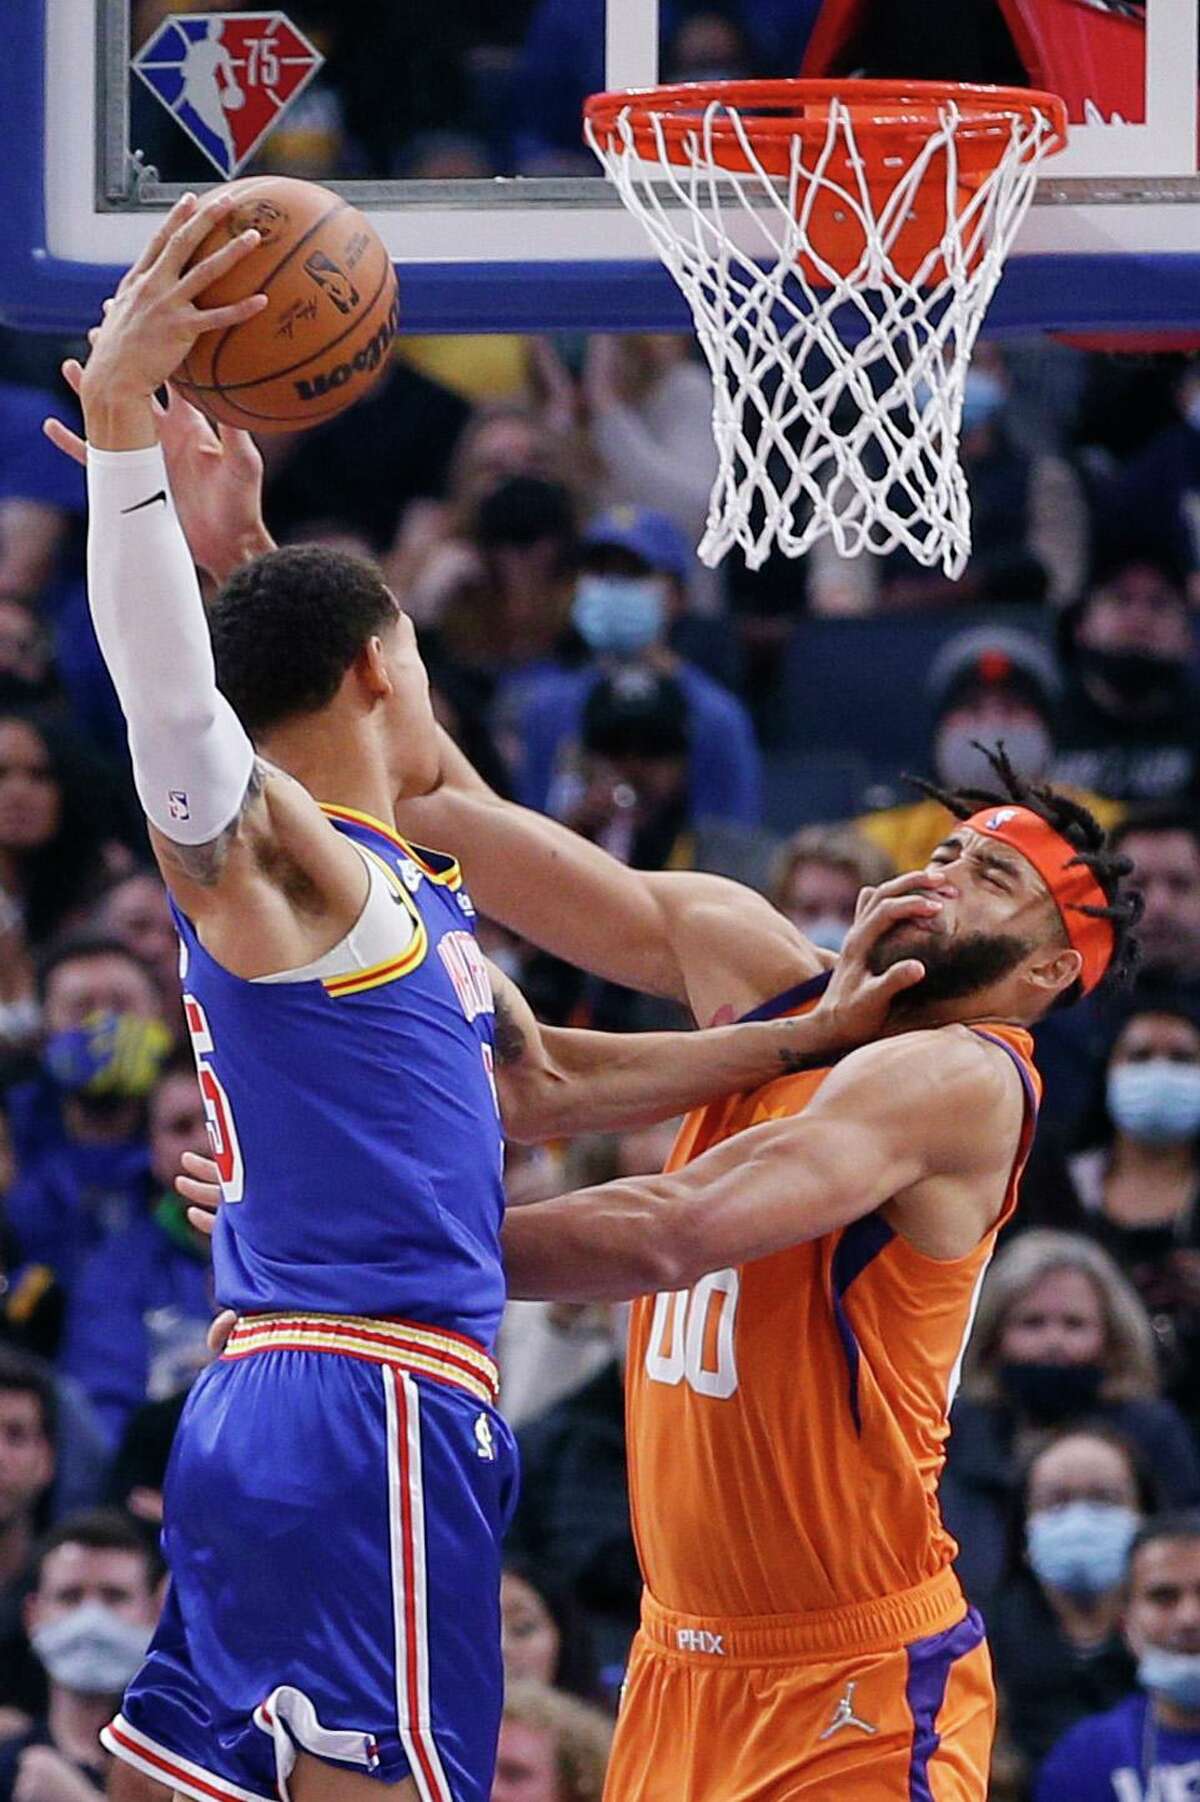 Where will the Warriors' JaVale McGee merry-go-round end up